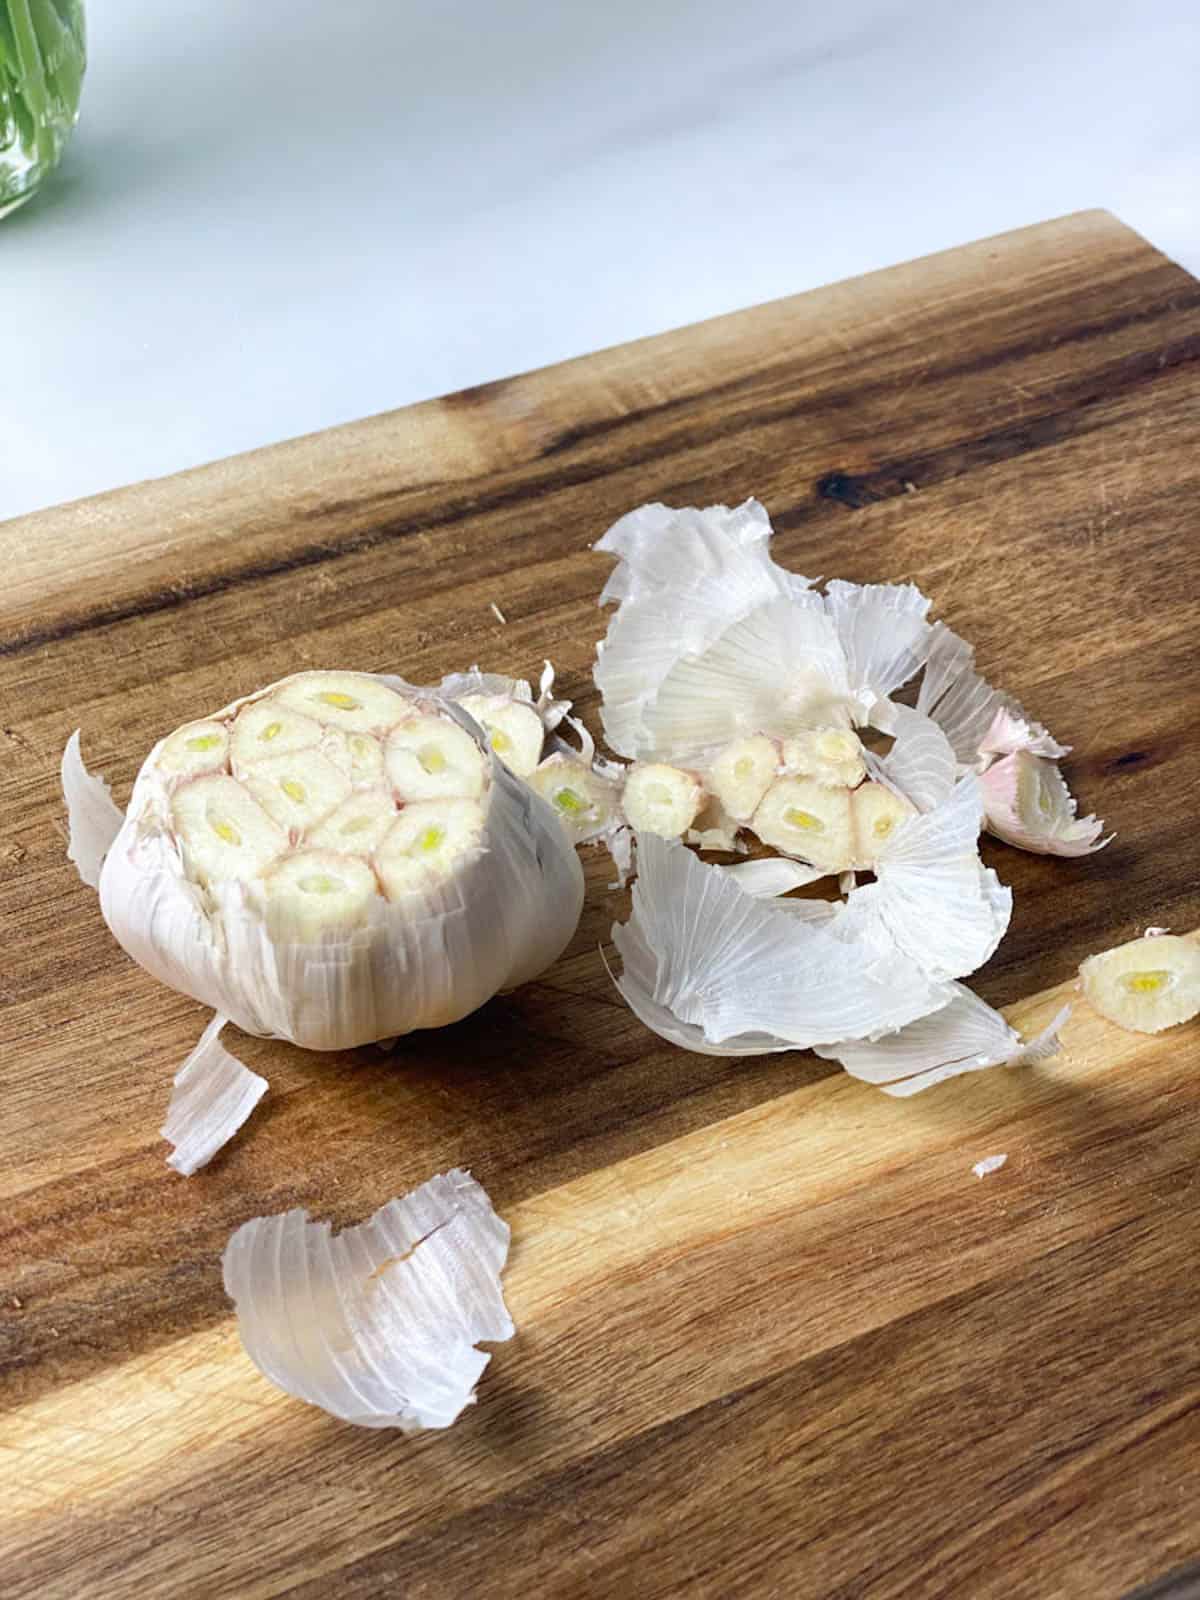 Bulb of garlic with the top cut off and most of the skins still in tact.